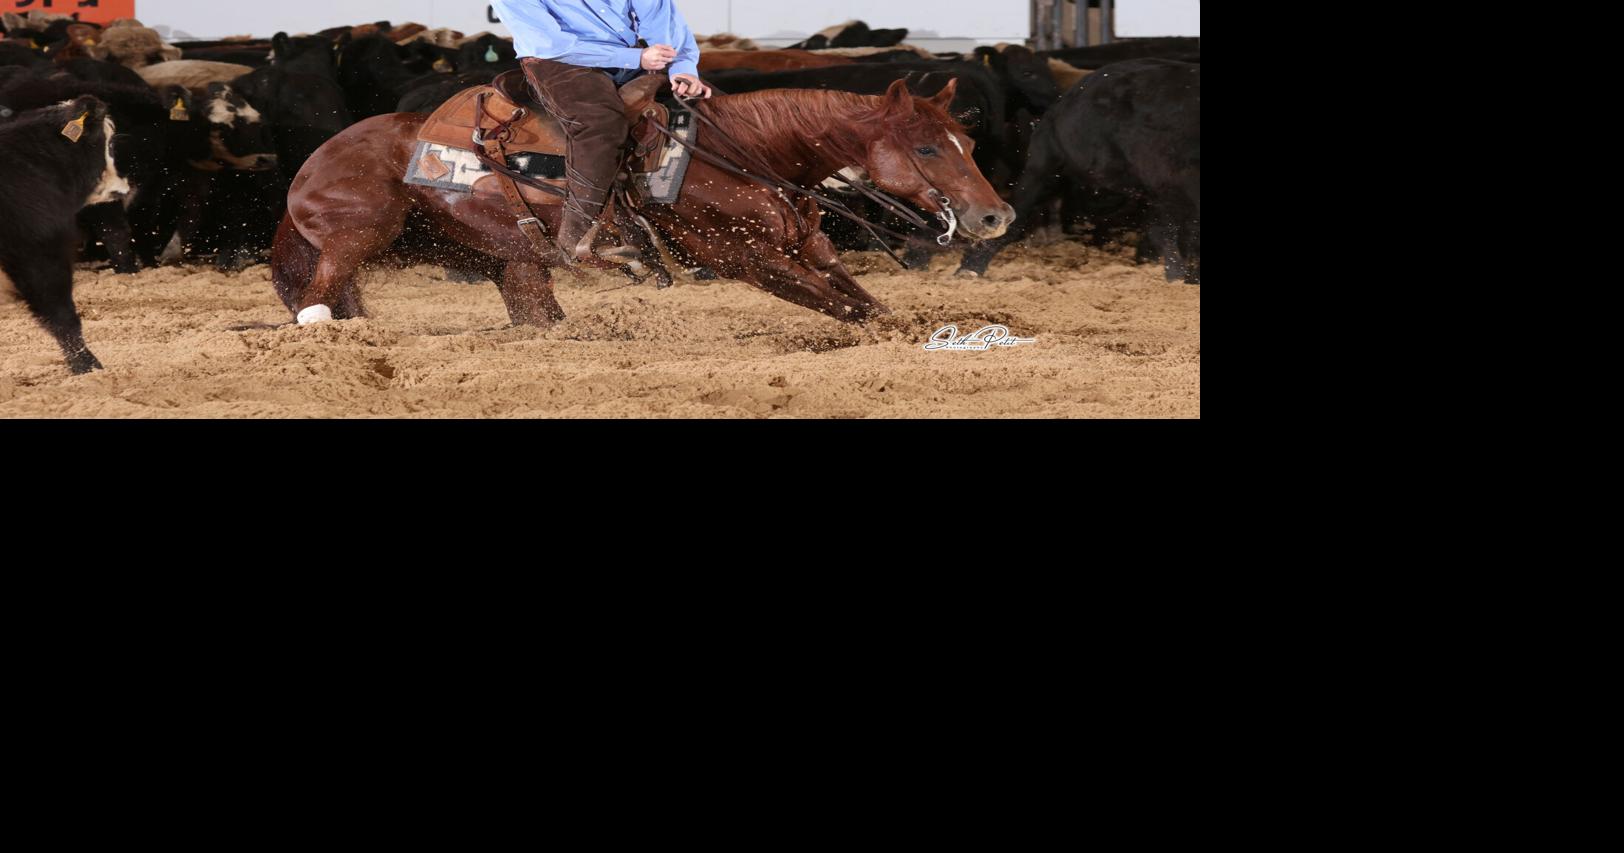 Harrison places seventh in world, NCHA world finals Sports